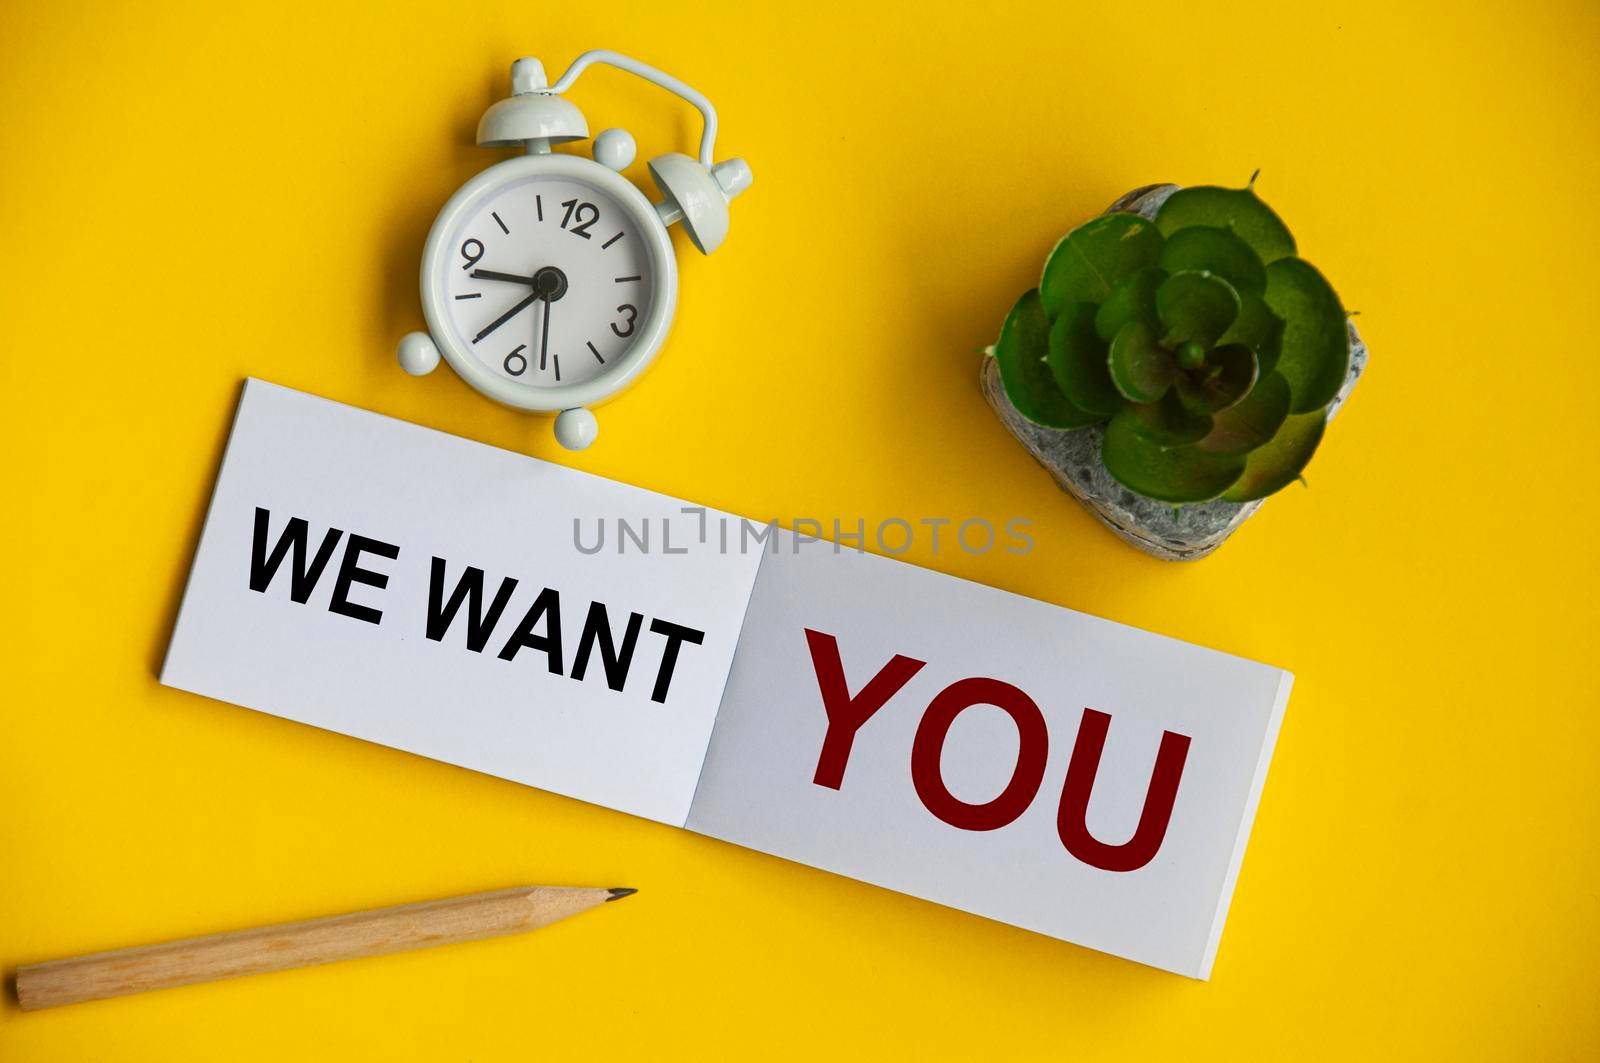 We want you text on notepad with alarm clock and plant background. Employment concept